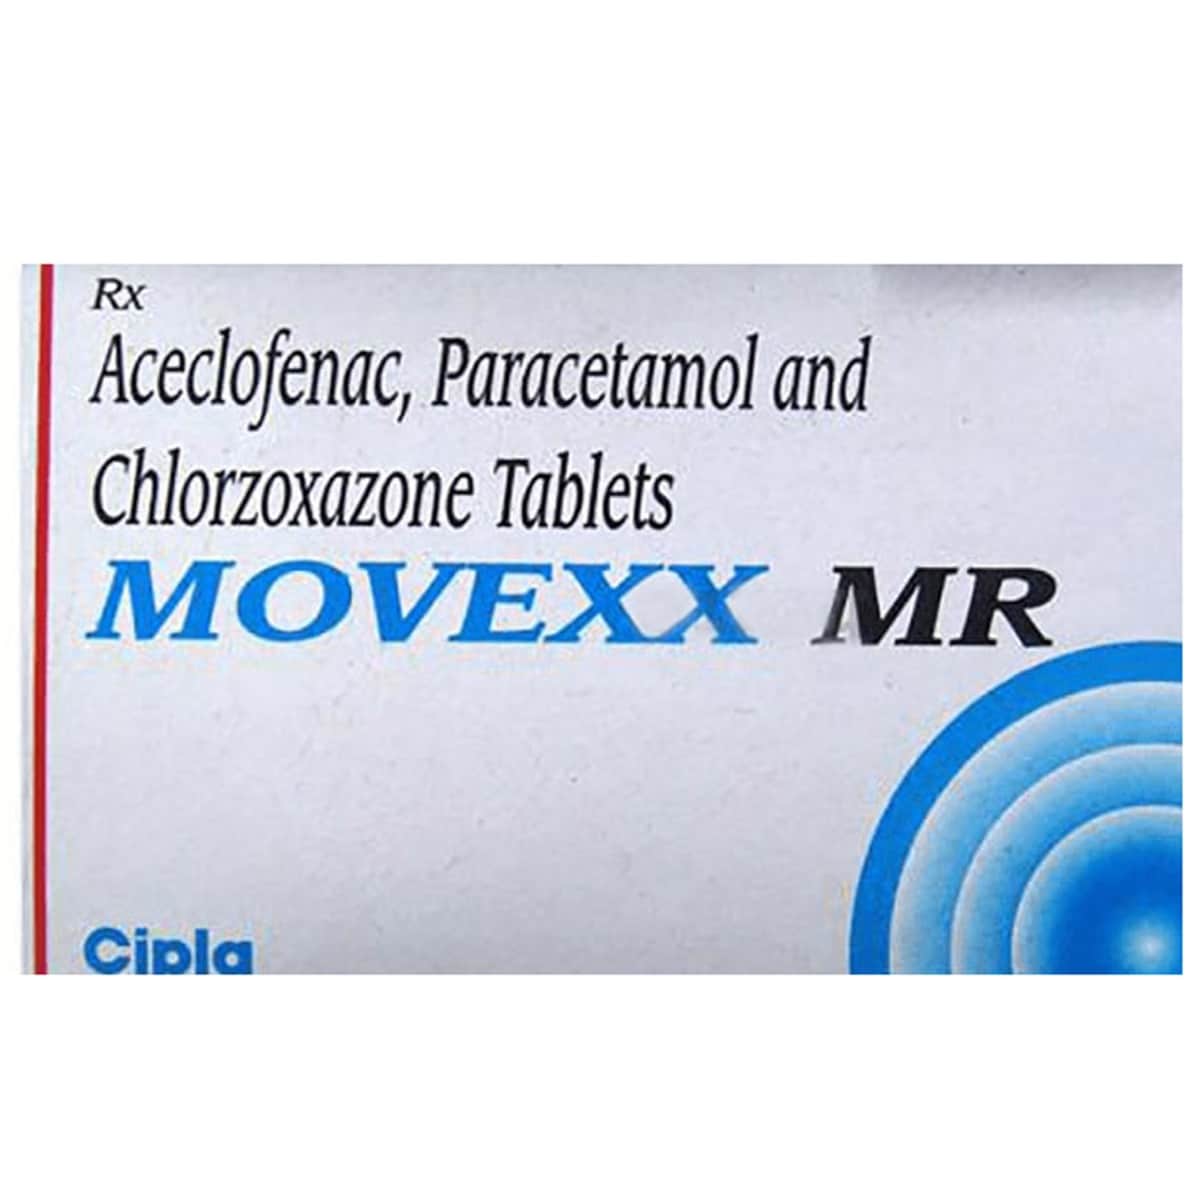 Movexx MR Tablet, Uses, Side Effects, Price